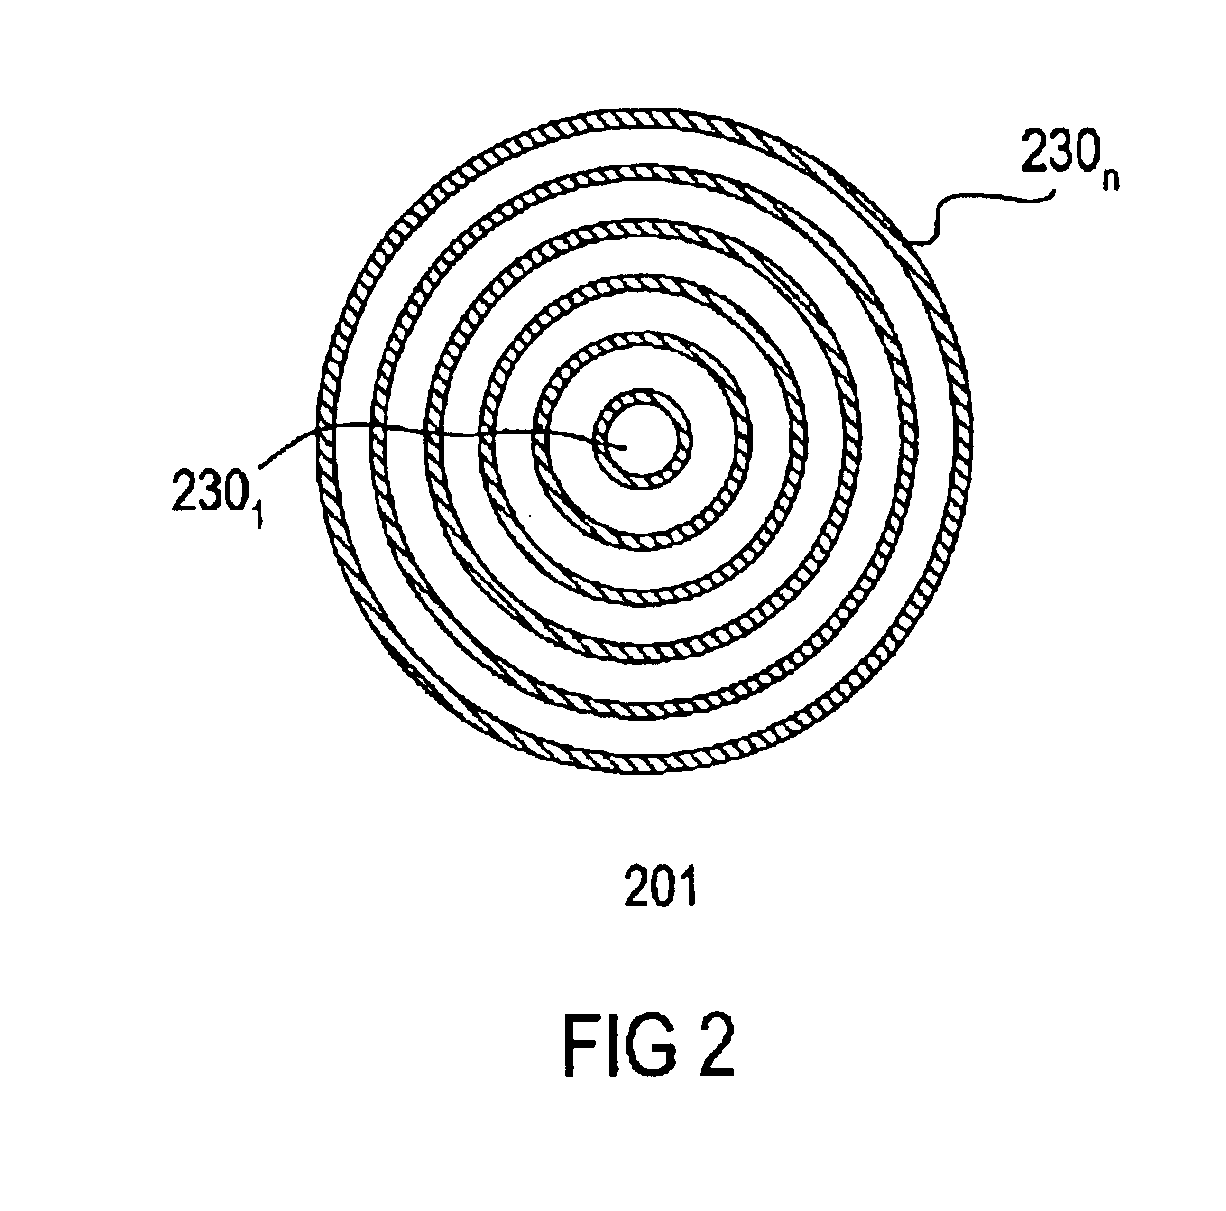 Alignment or overlay marks for semiconductor processing